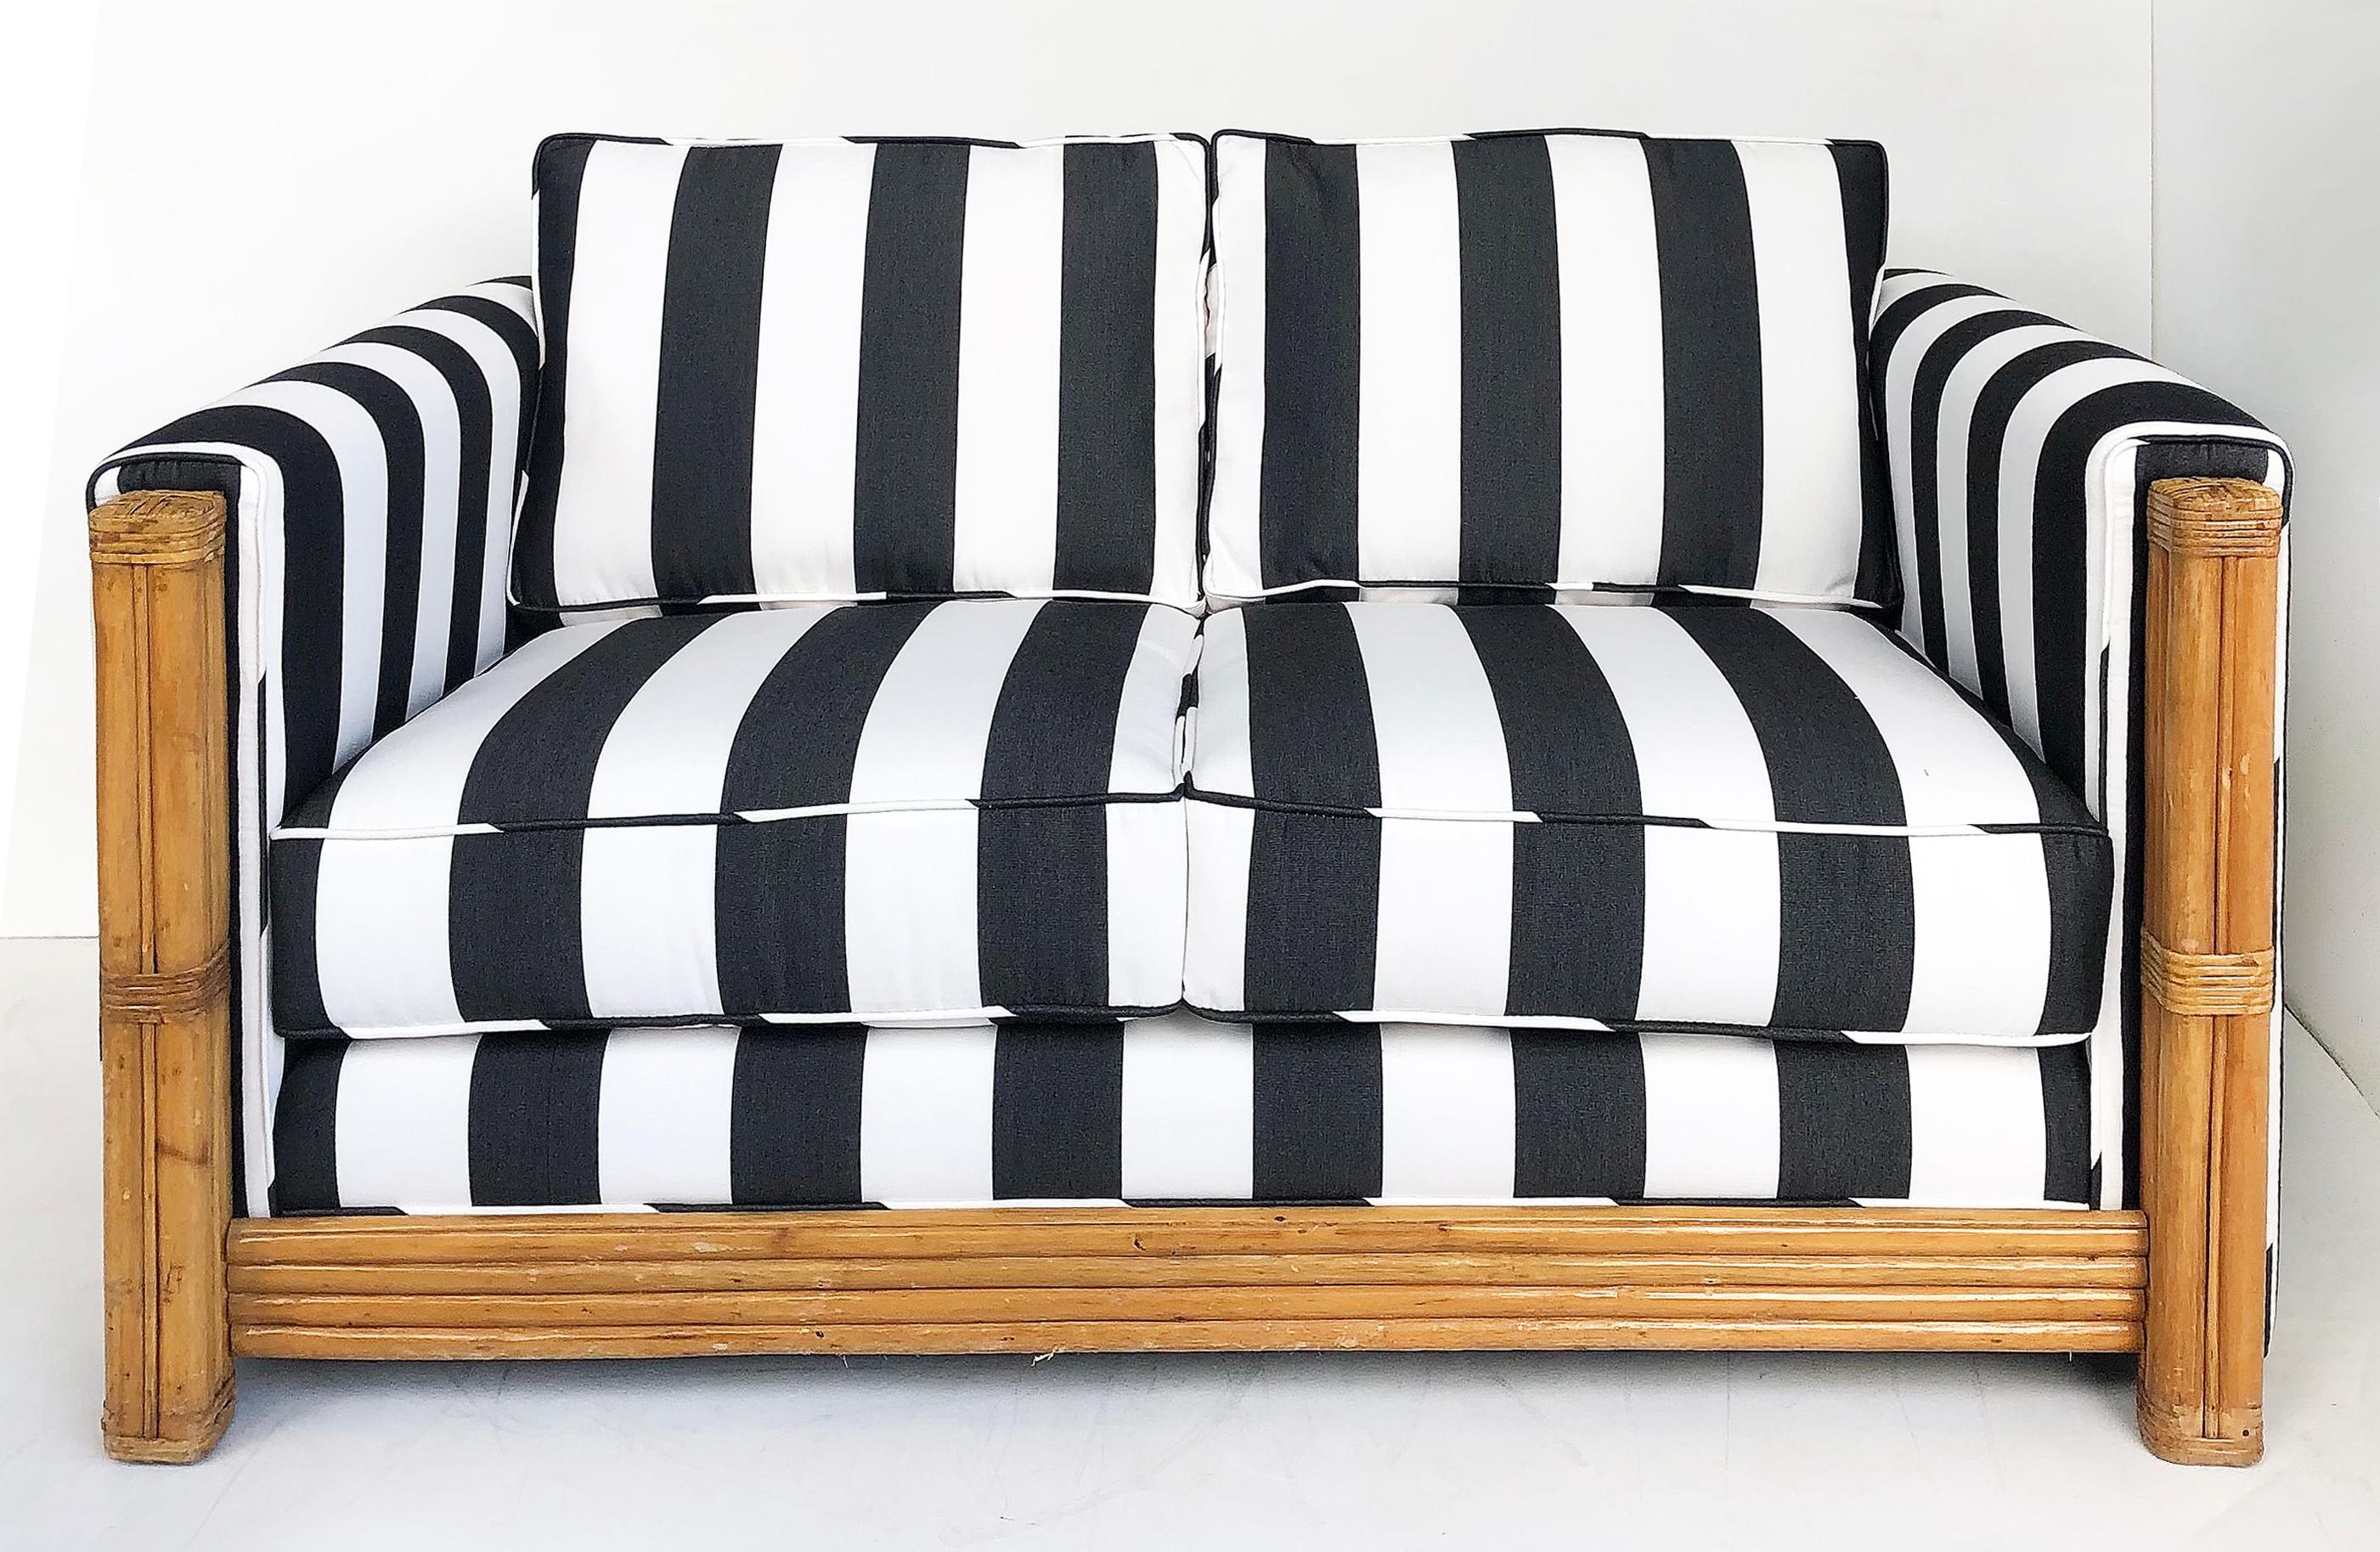 Rattan loveseat newly upholstered with black & white striped fabric

Offered for sale is a rattan loveseat newly upholstered with black and white striped fabric. The frame is rattan with wrapped ends. there is some vintage wear to the legs as